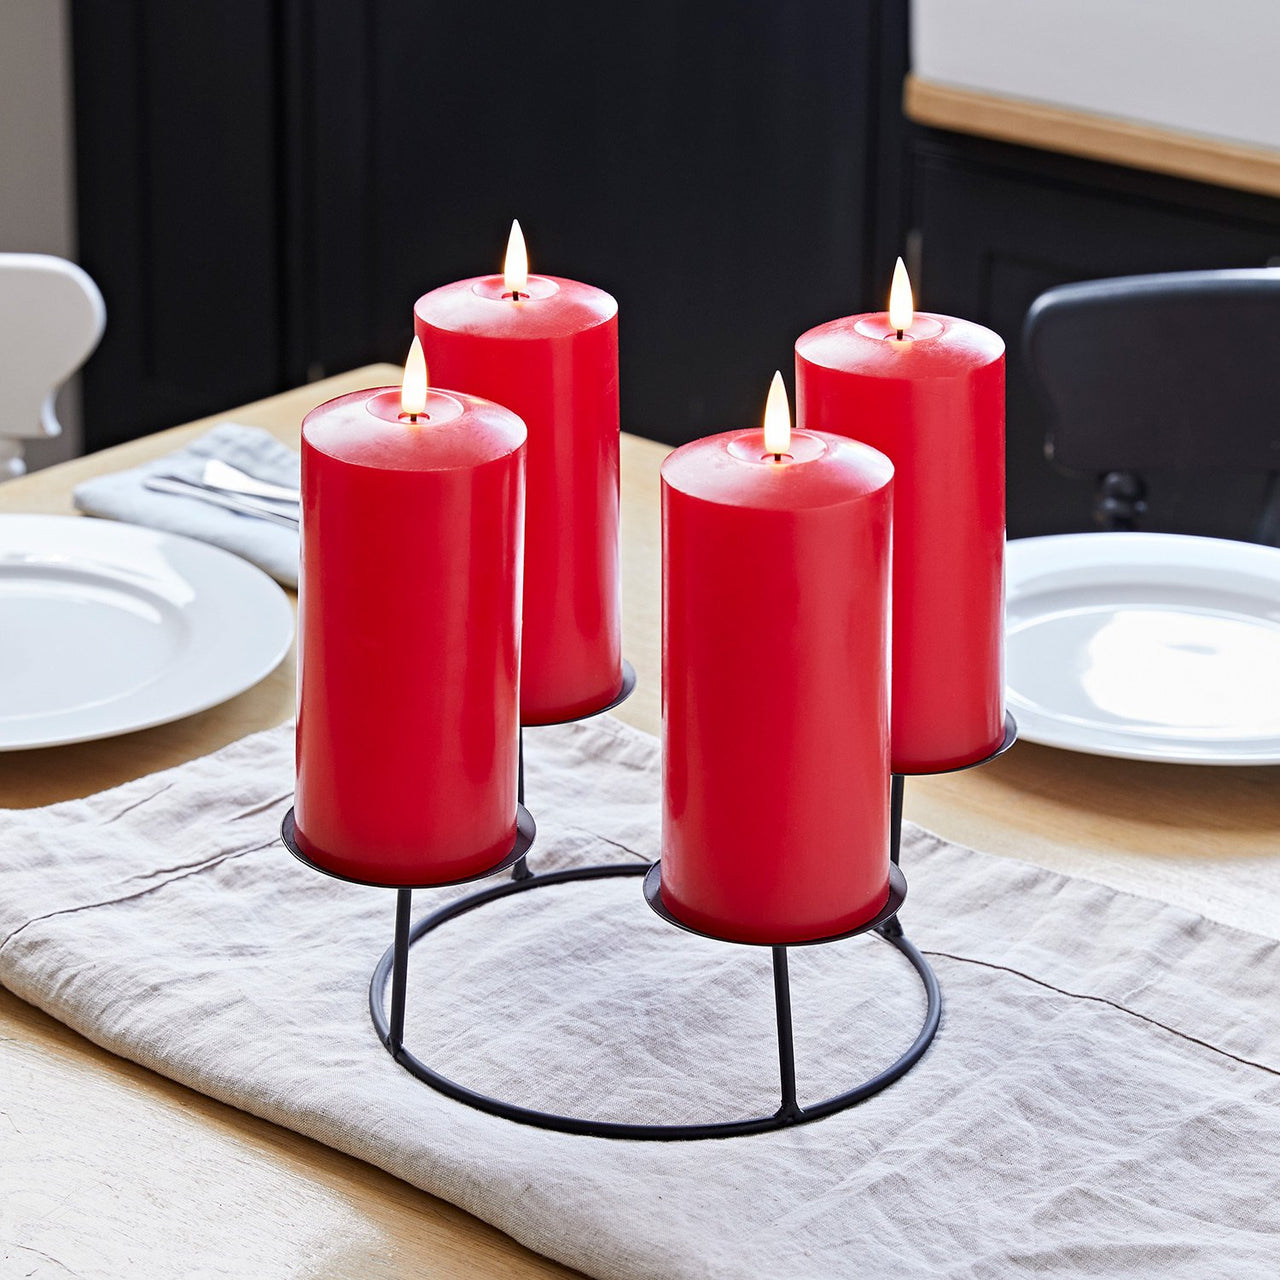 Red Berry Advent Wreath & Red  TruGlow® Candle Table Decoration